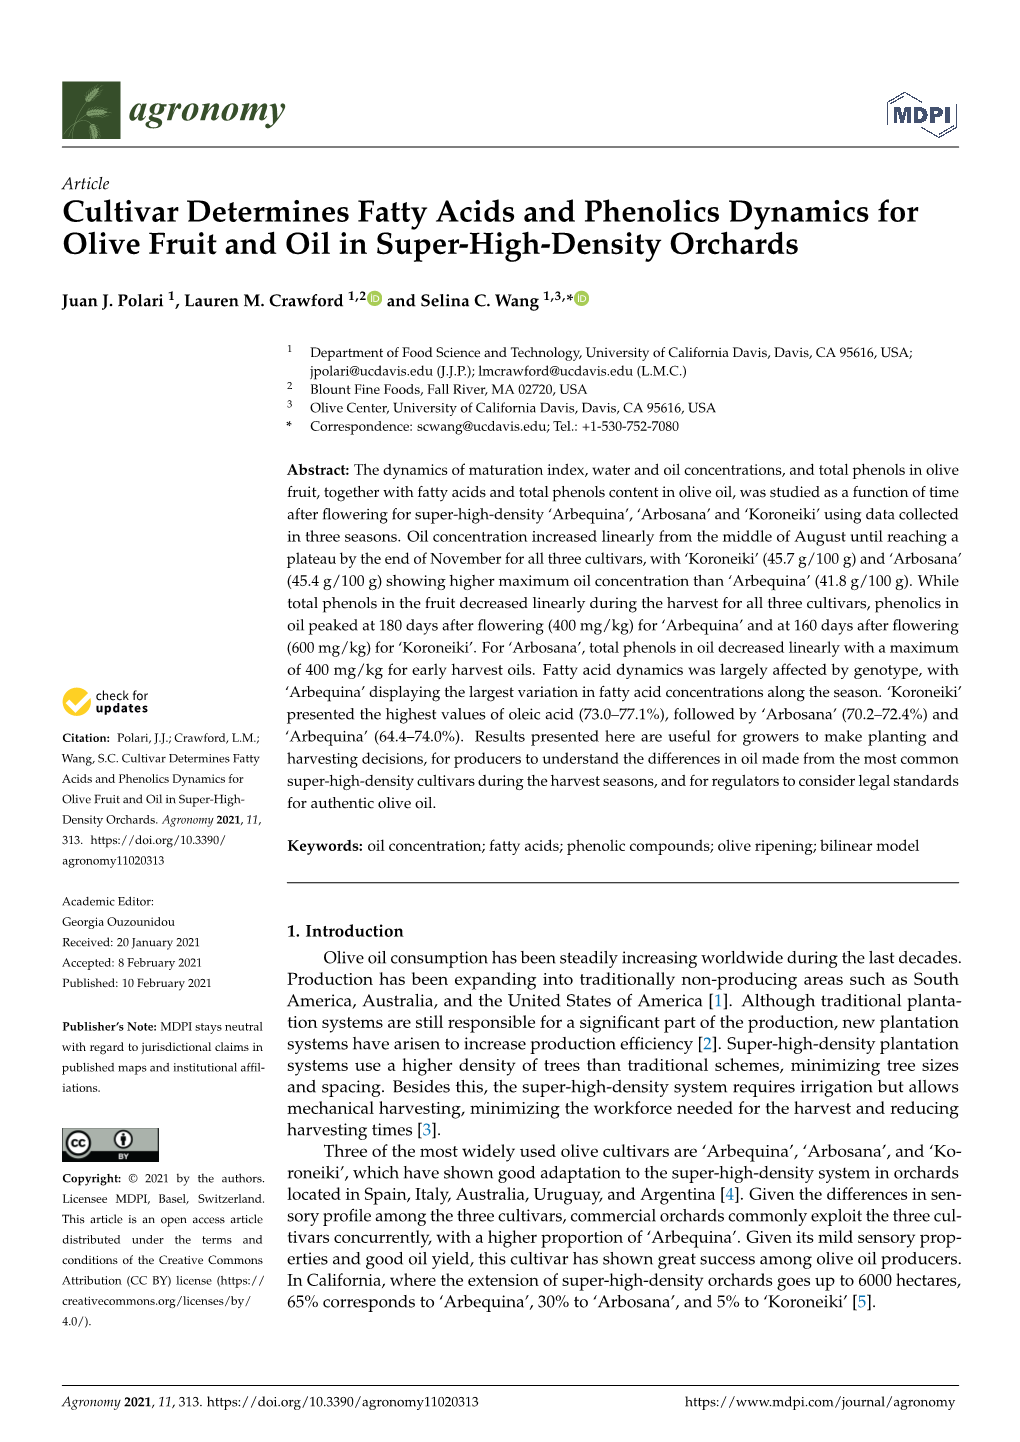 Cultivar Determines Fatty Acids and Phenolics Dynamics for Olive Fruit and Oil in Super-High-Density Orchards